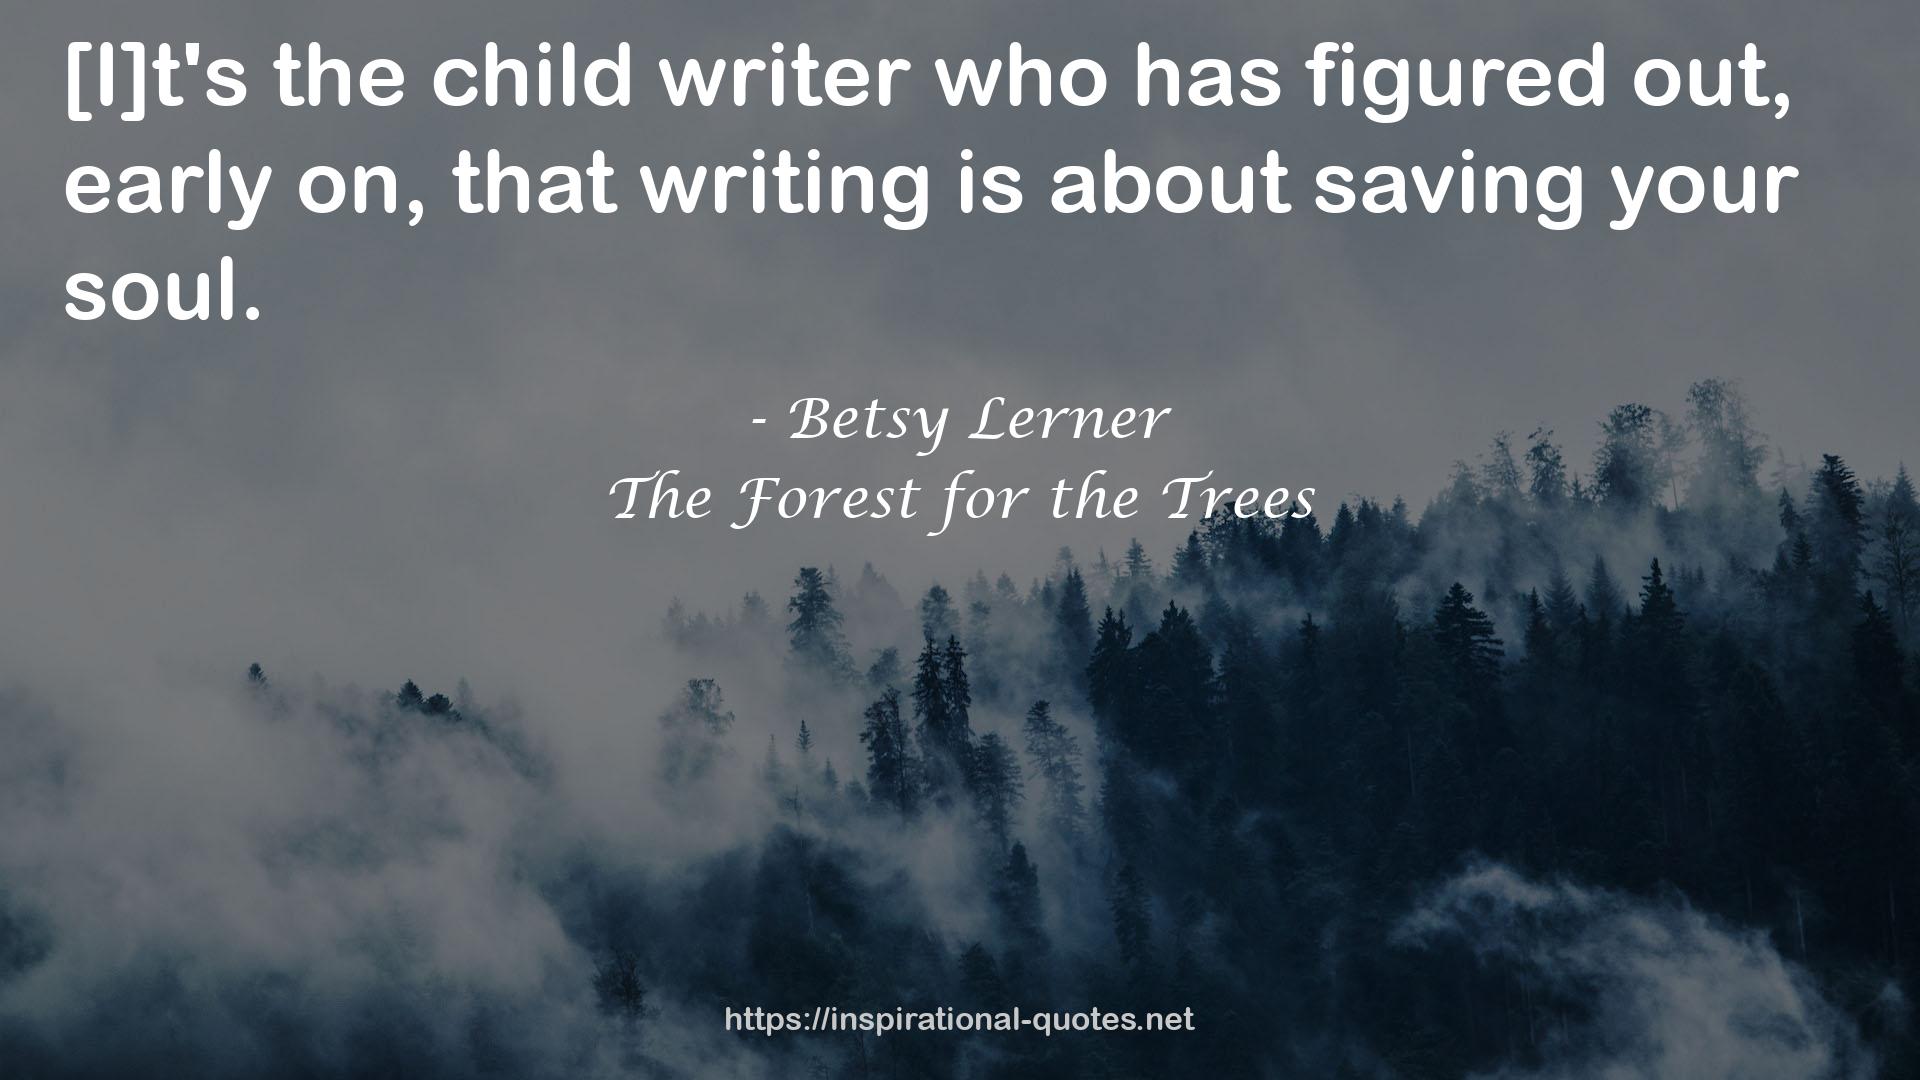 Betsy Lerner QUOTES